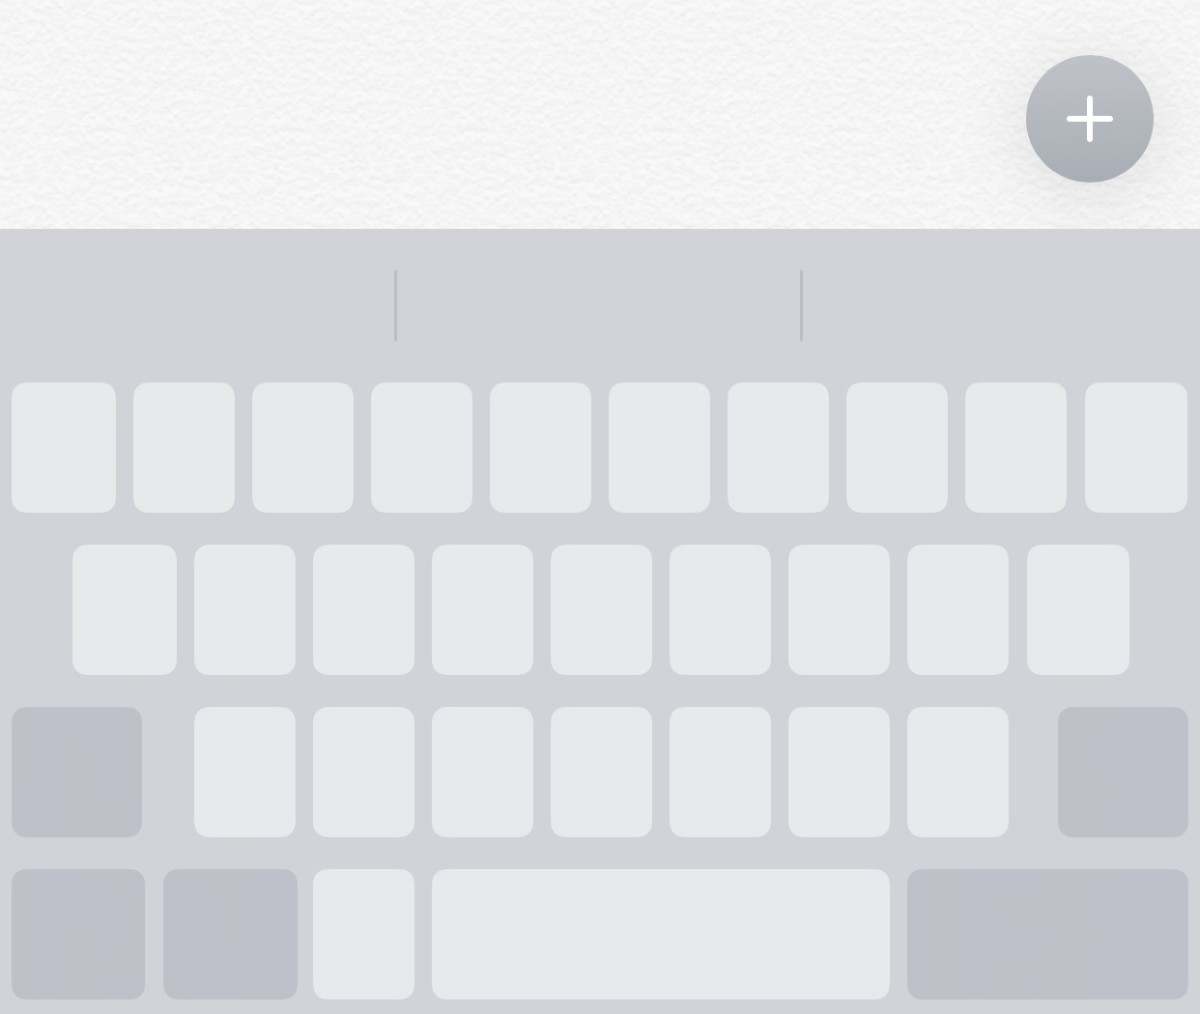 When you use the iOS trackpad mode, all the keys are blank!